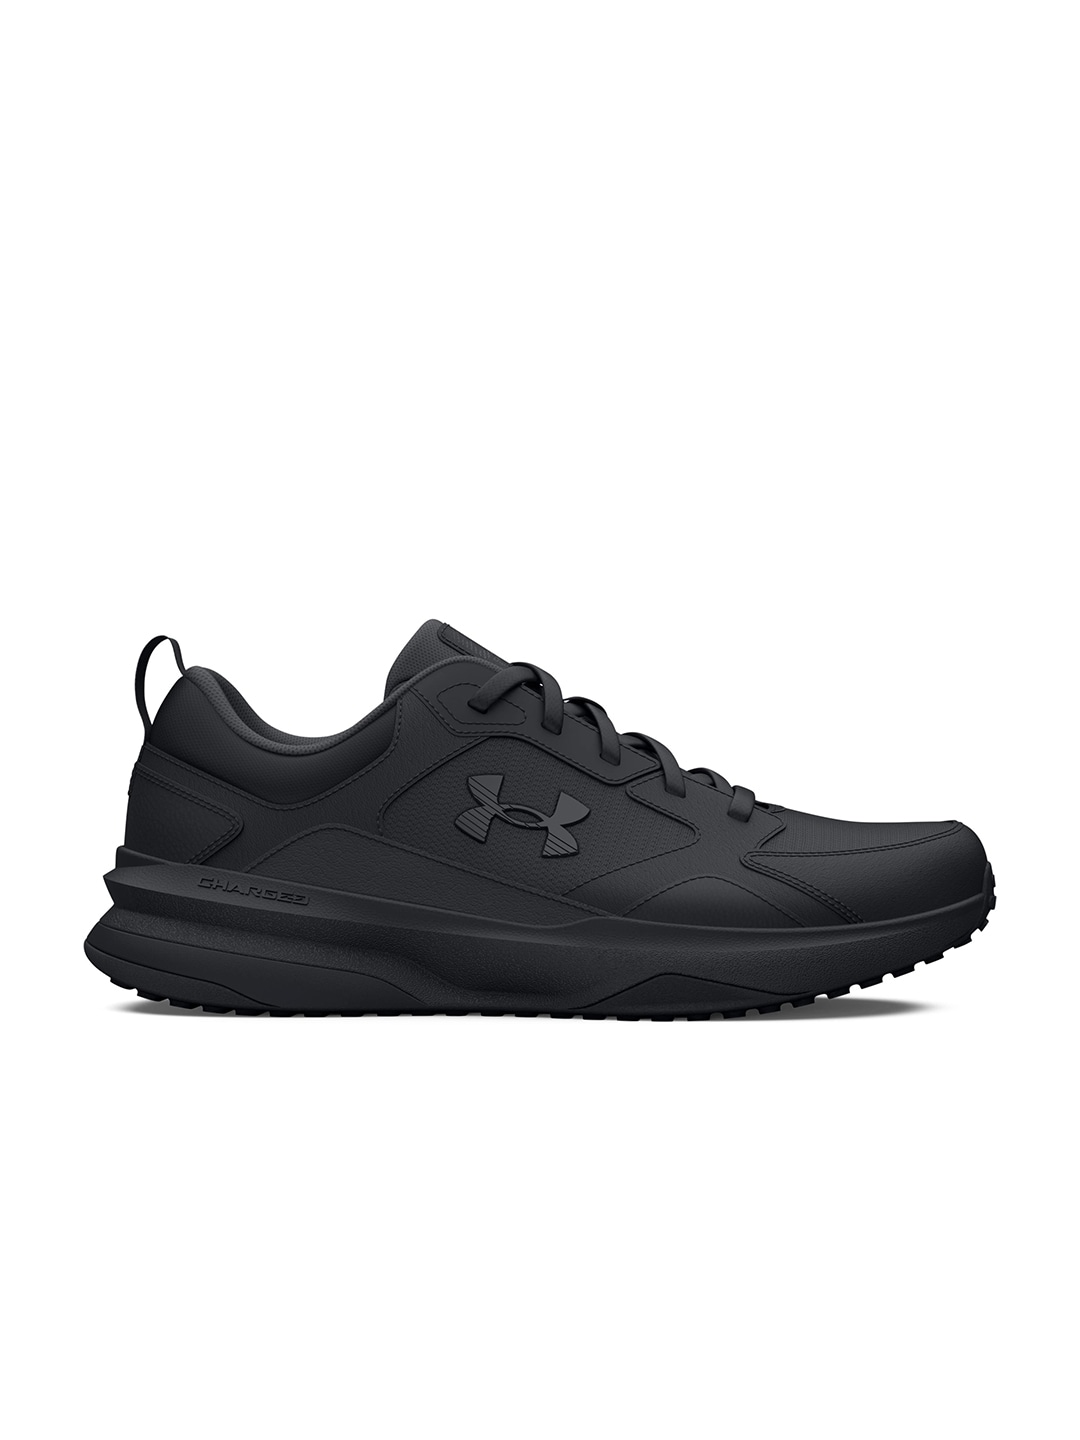 UNDER ARMOUR Men Woven Design Charged Edge Training or Gym Shoes